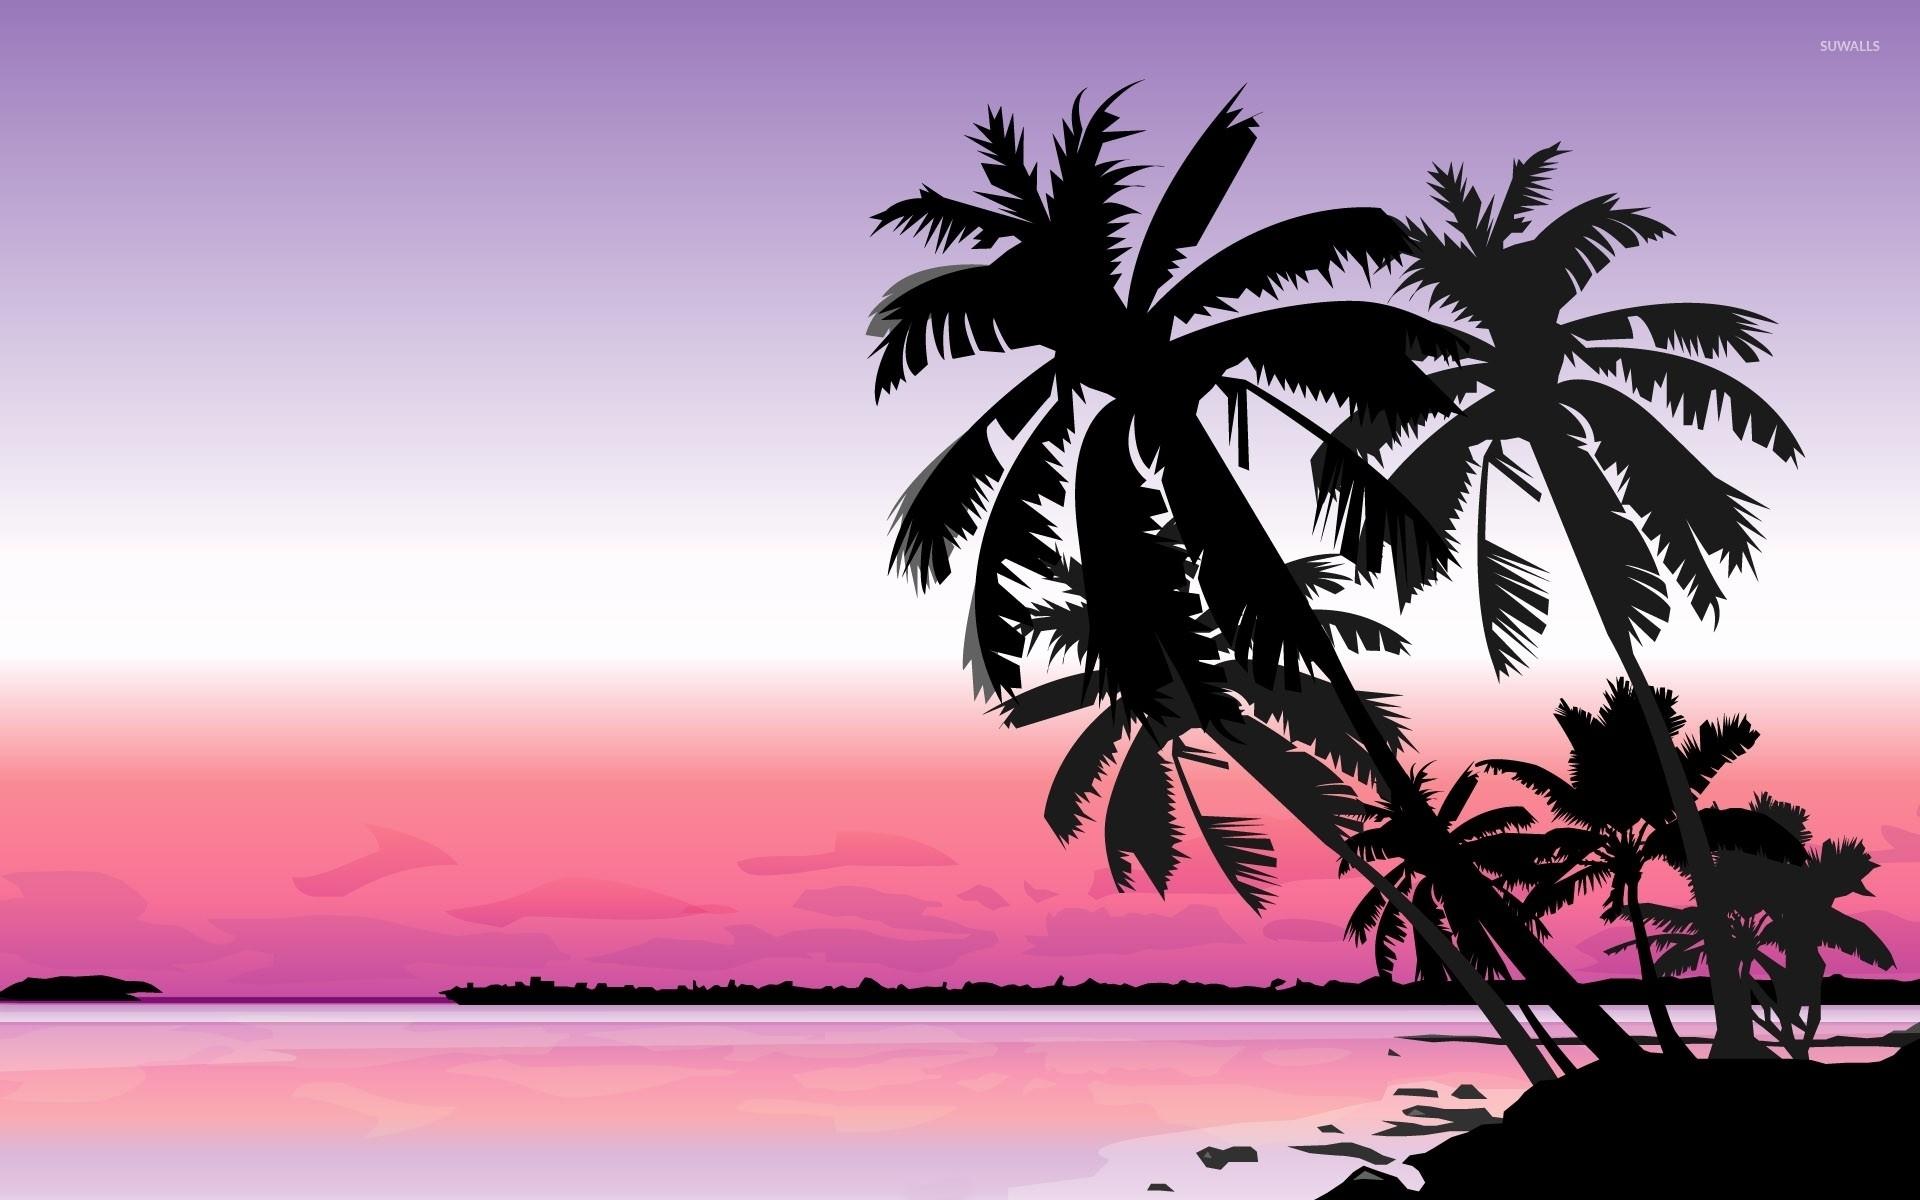 Sunset Palm Tree Wallpapers - Wallpaper Cave